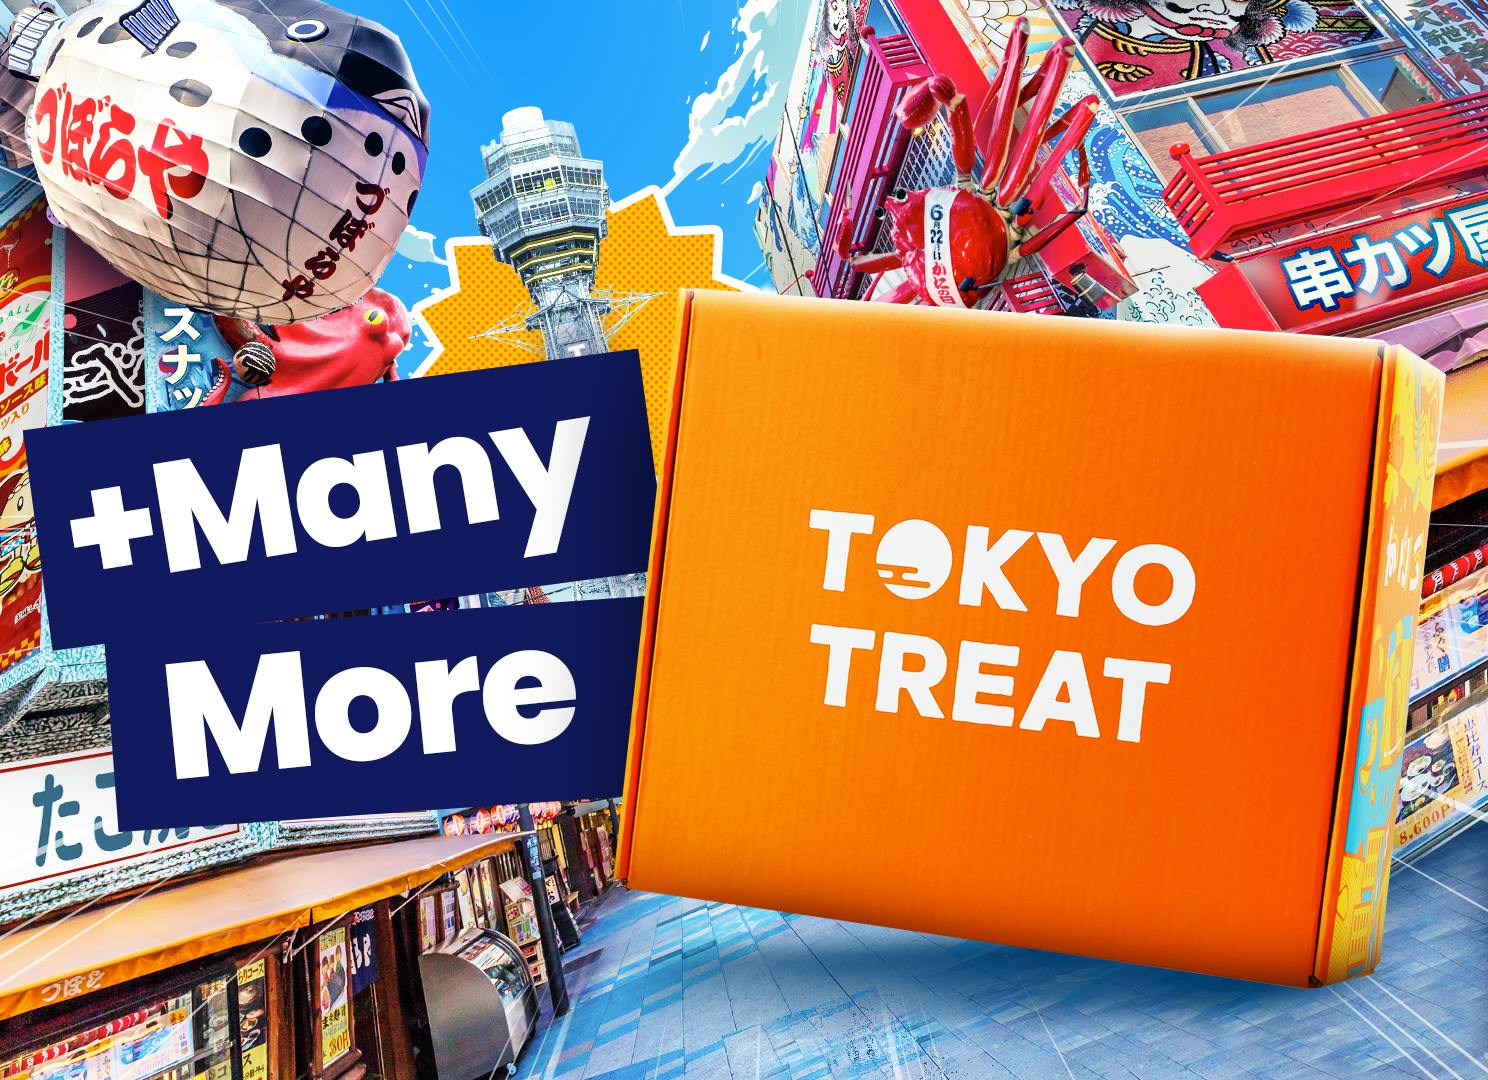 The orange TokyoTreat box is shown in Osaka with a giant crab and blowfish in the background.